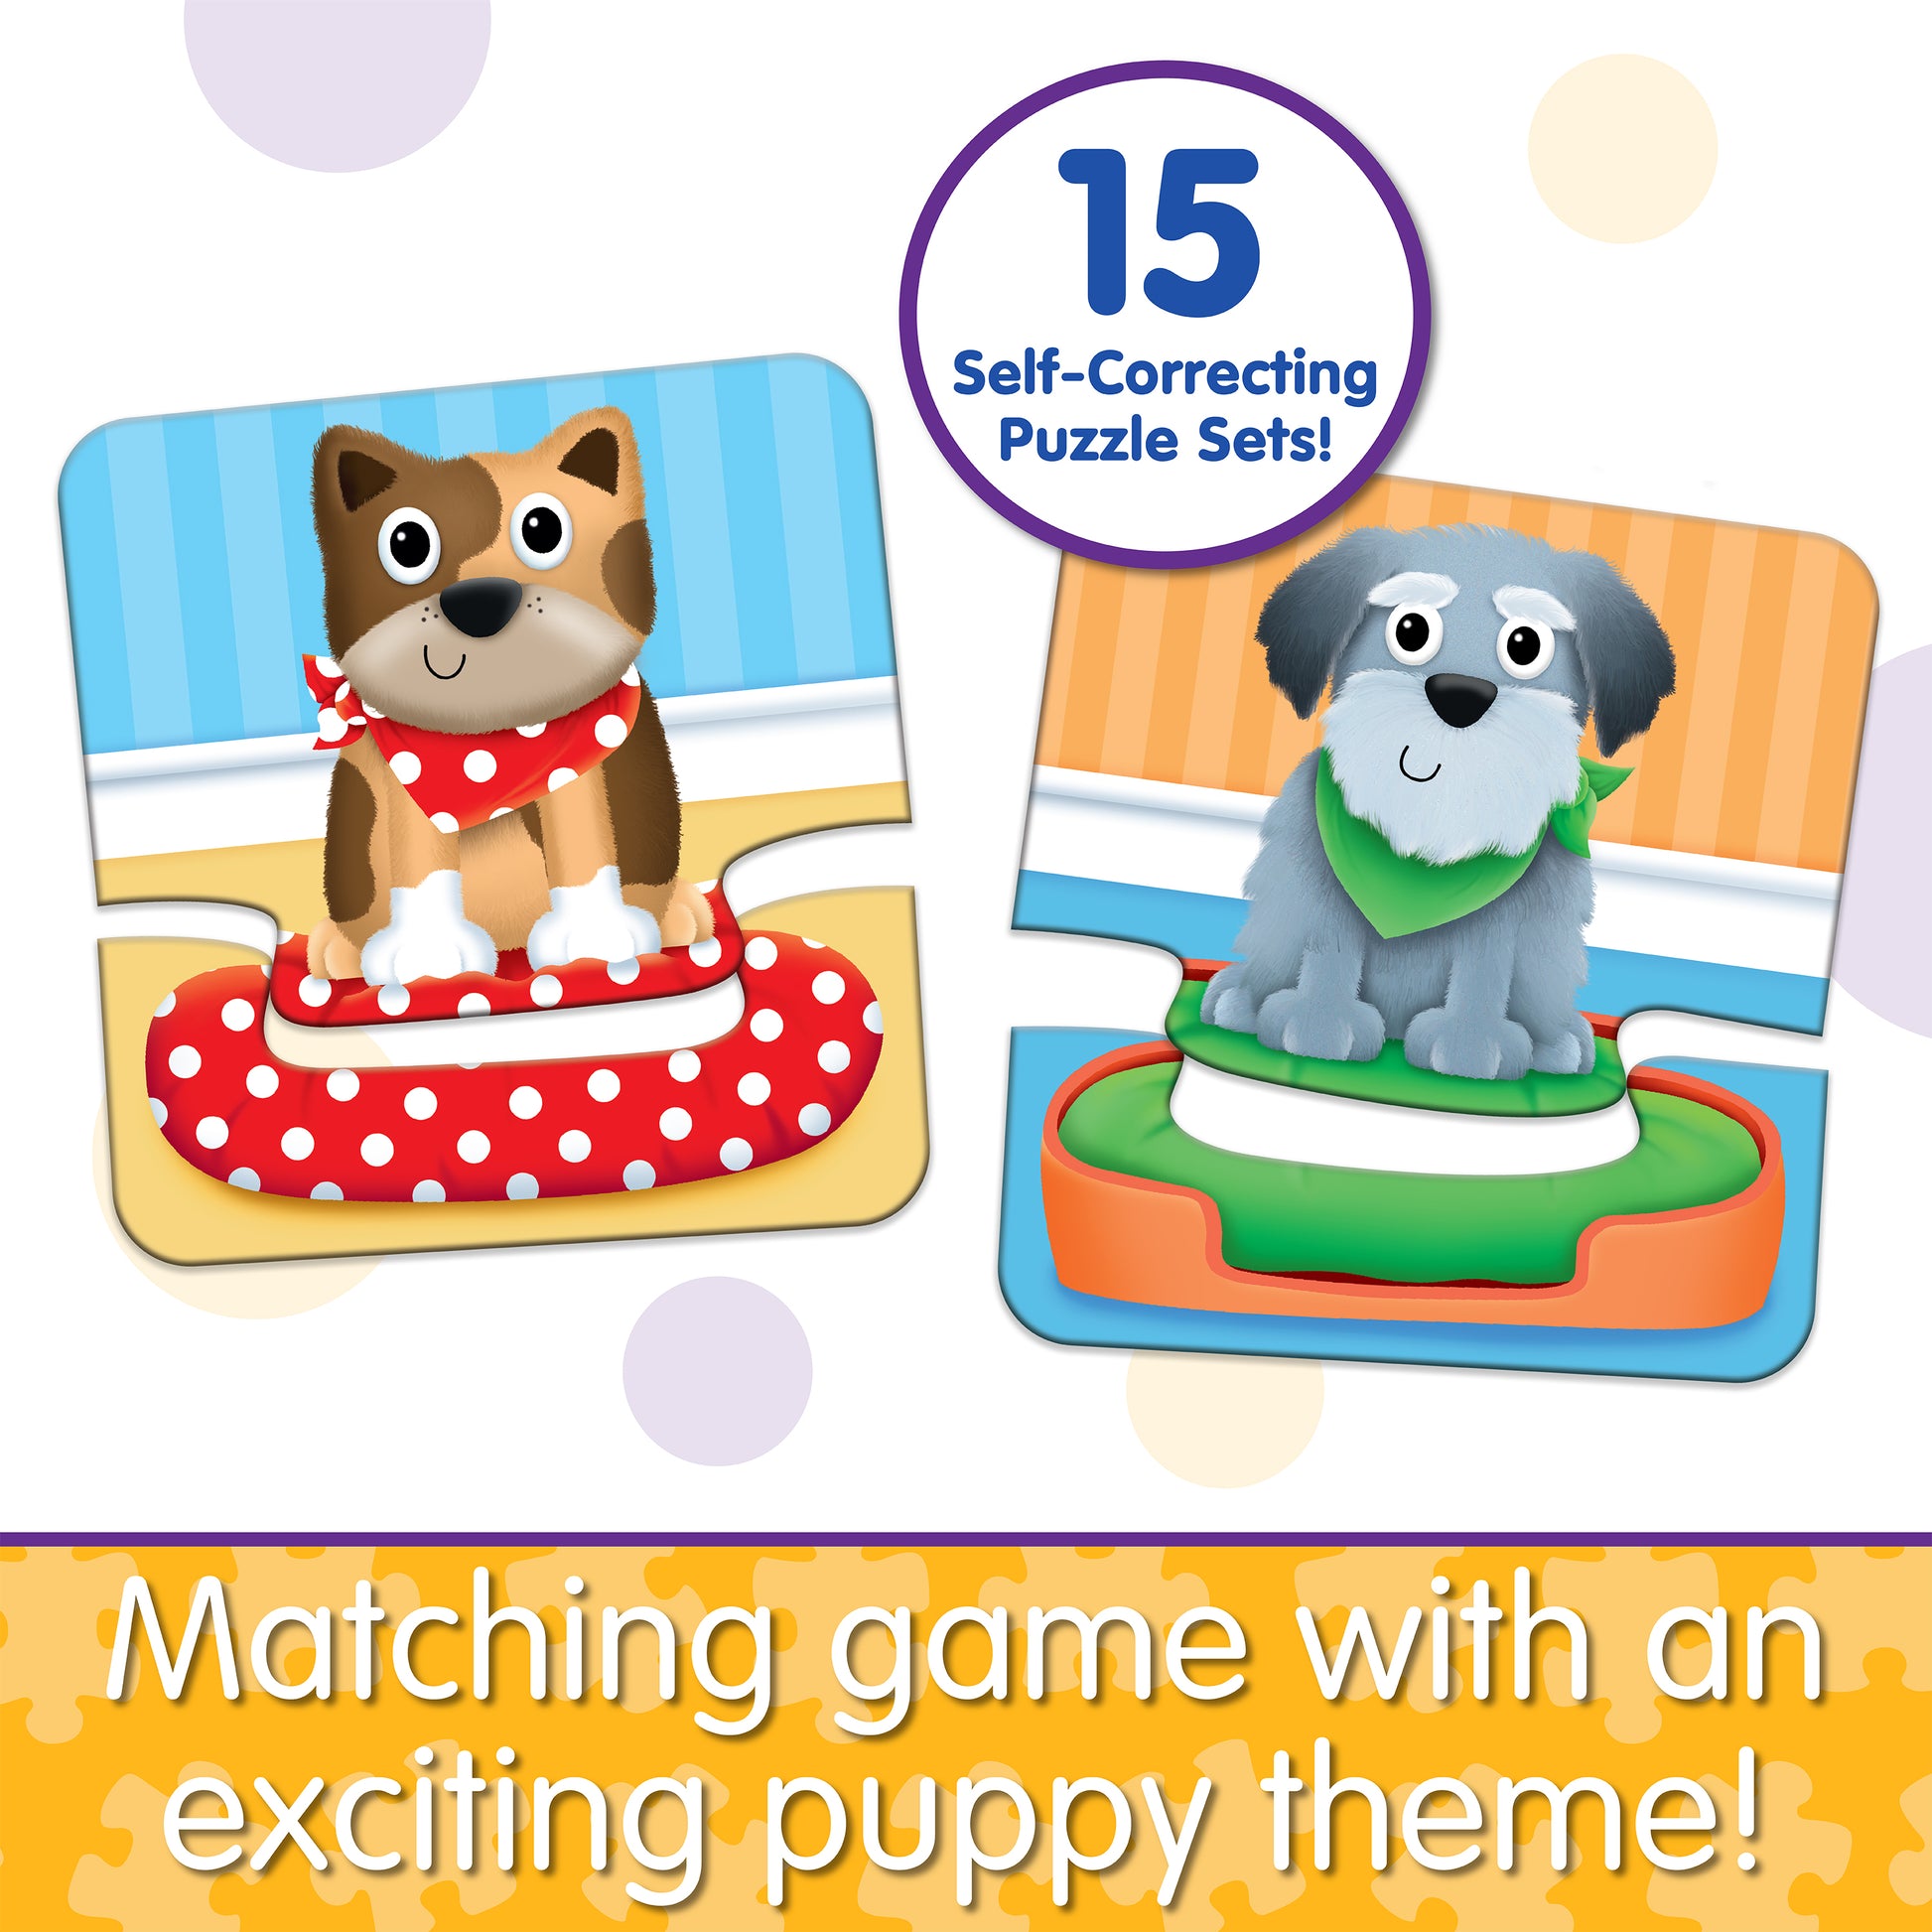 Infographic about Puppy Match's features